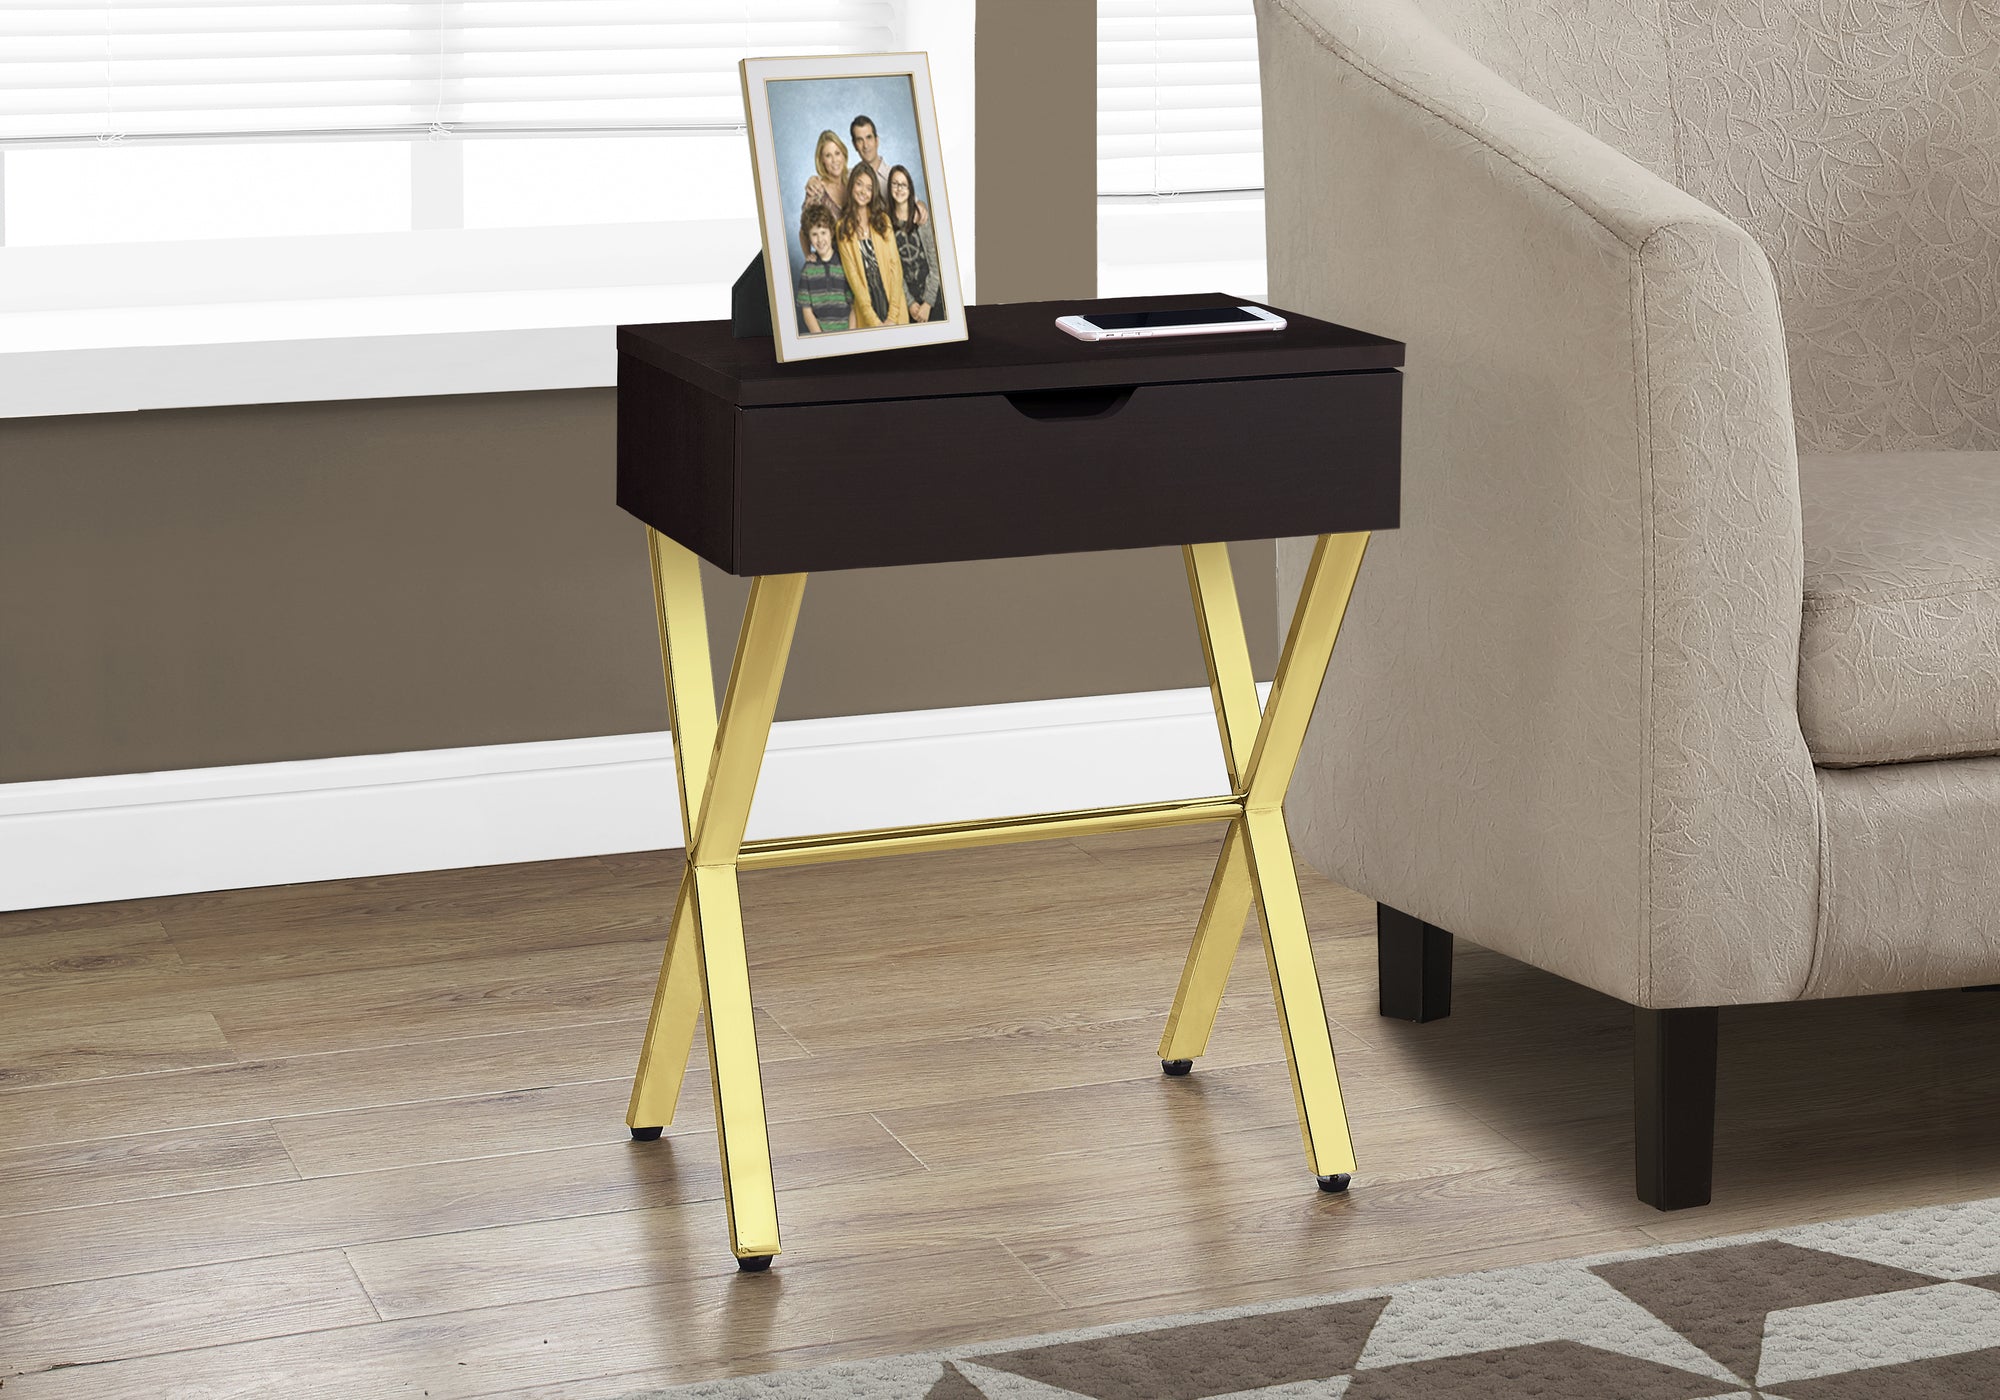 MN-943261    Accent Table, Side, End, Nightstand, Lamp, Living Room, Bedroom, Metal Legs, Laminate, Dark Brown, Gold, Contemporary, Modern